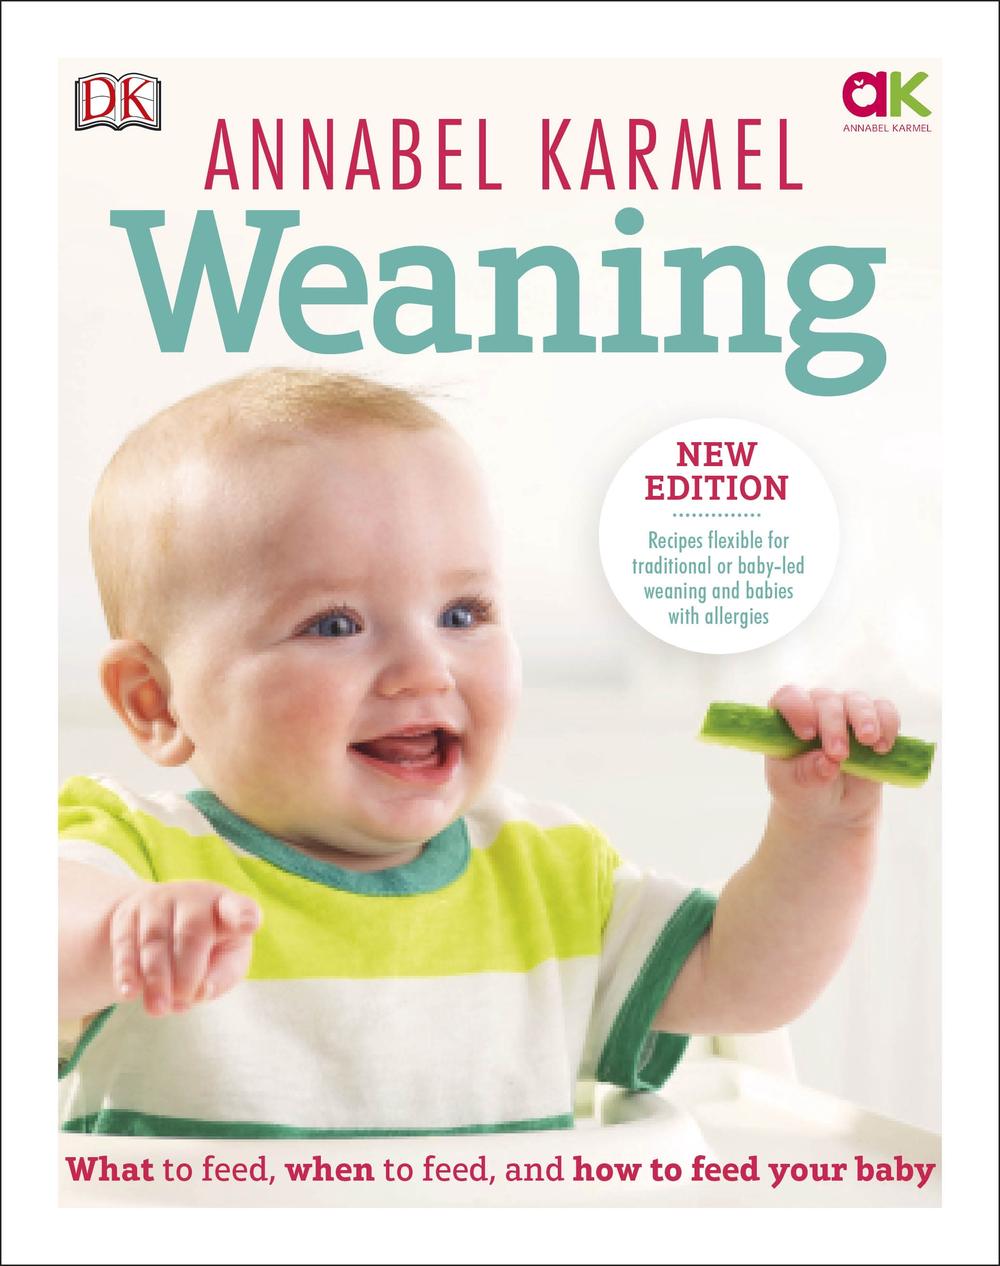 Weaning by Annabel Karmel, Hardcover, 9780241352489 | Buy online at The ...